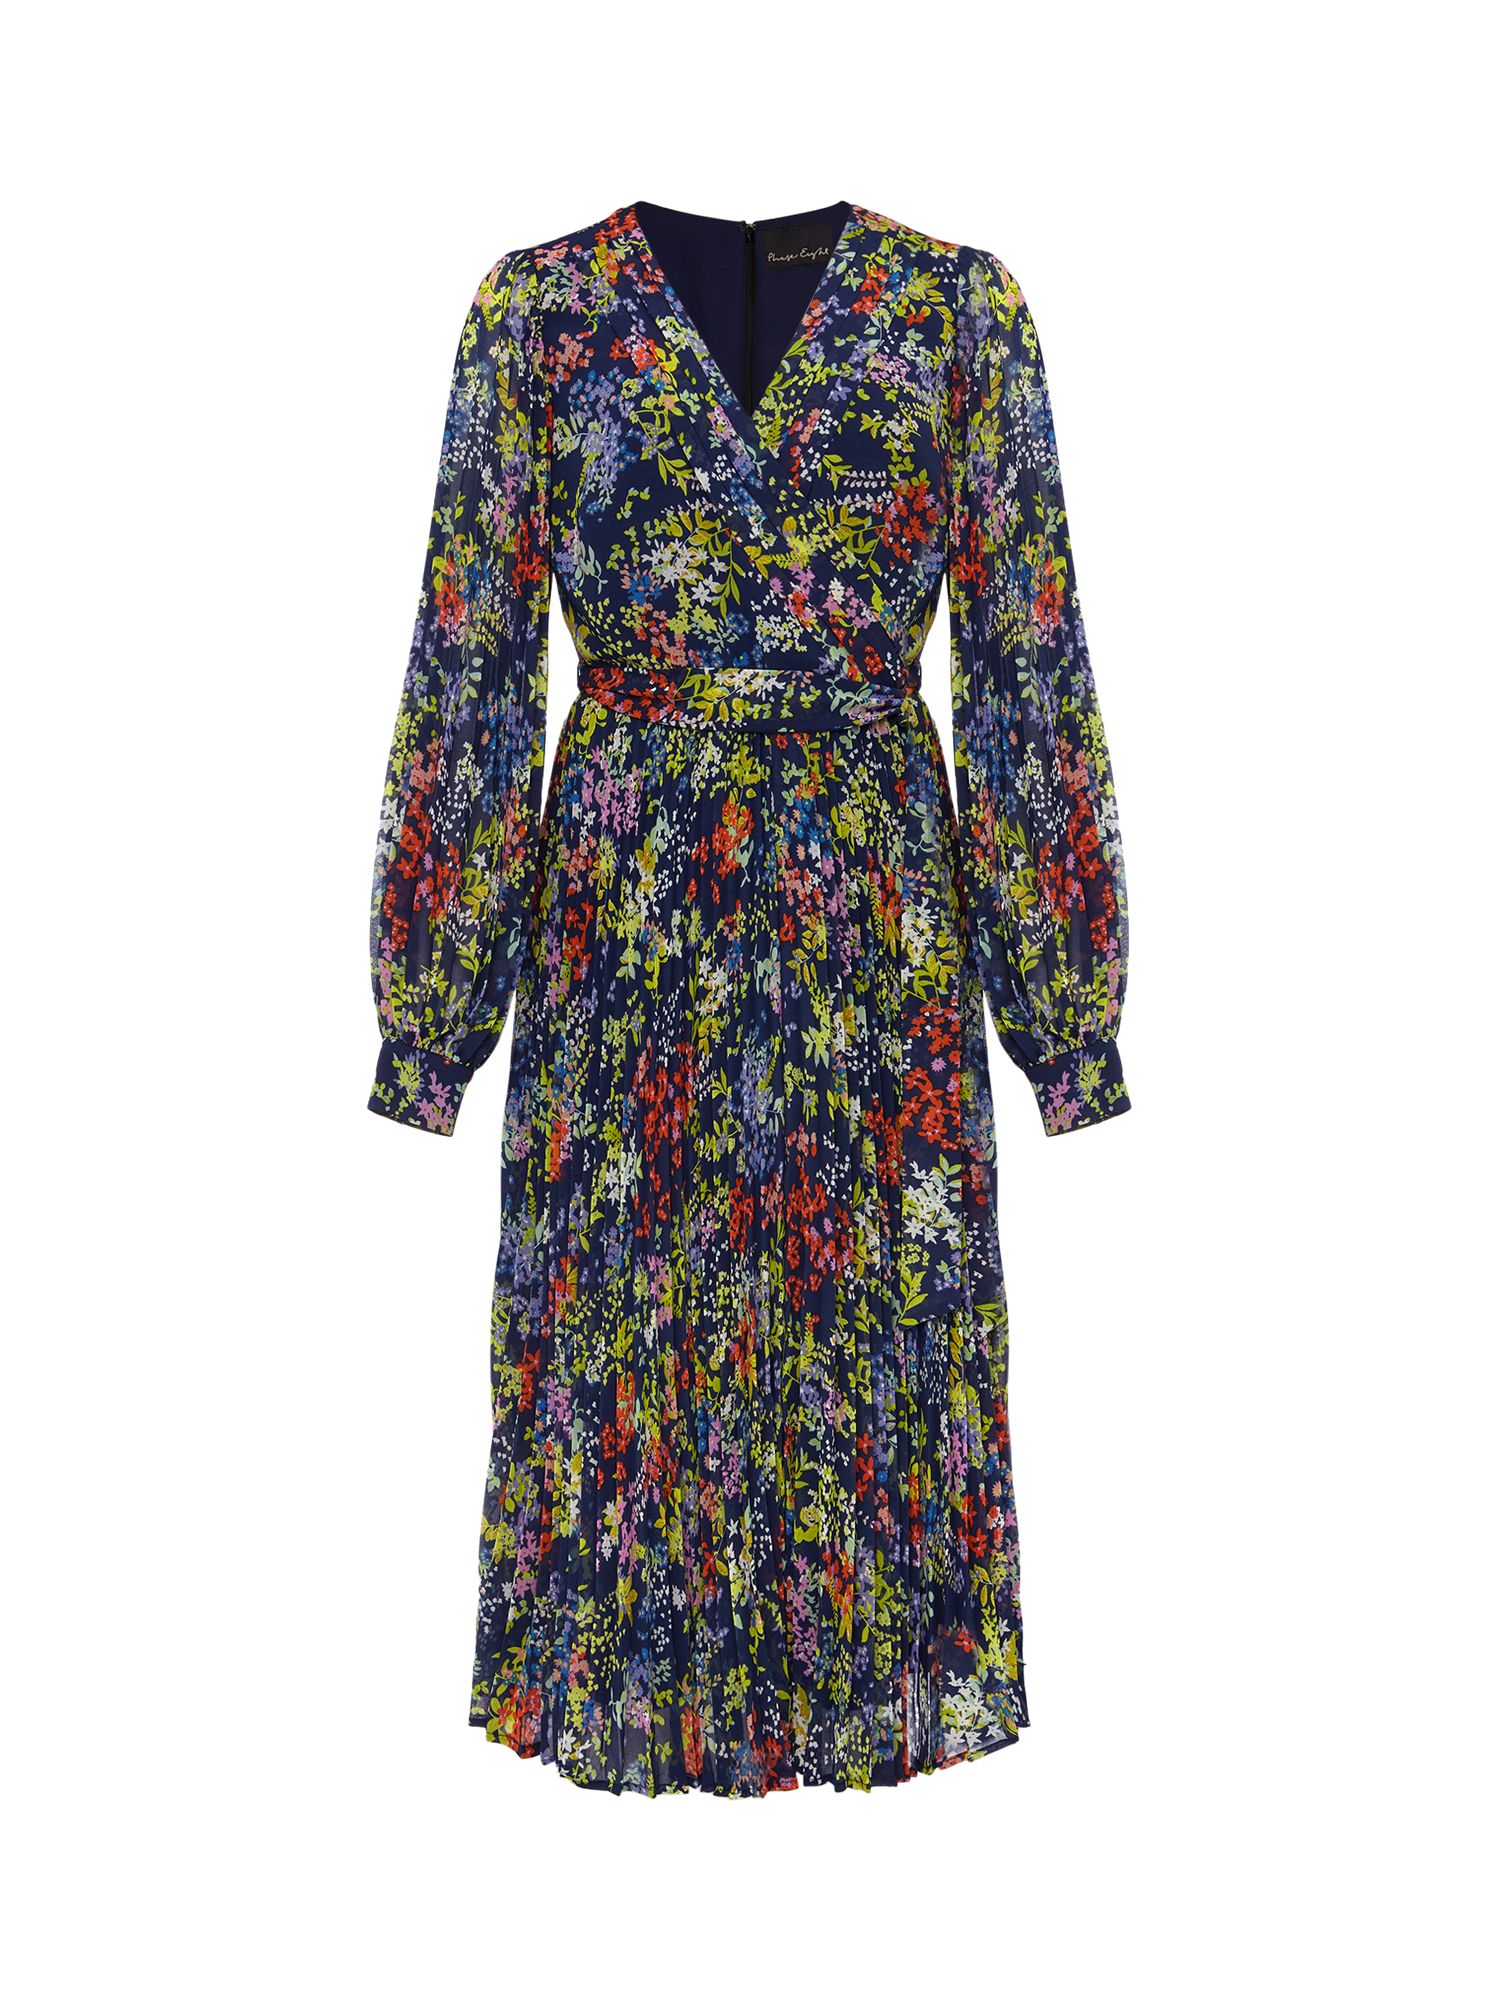 Phase Eight Fenella Floral Print Pleated Dress, French Navy/Multi